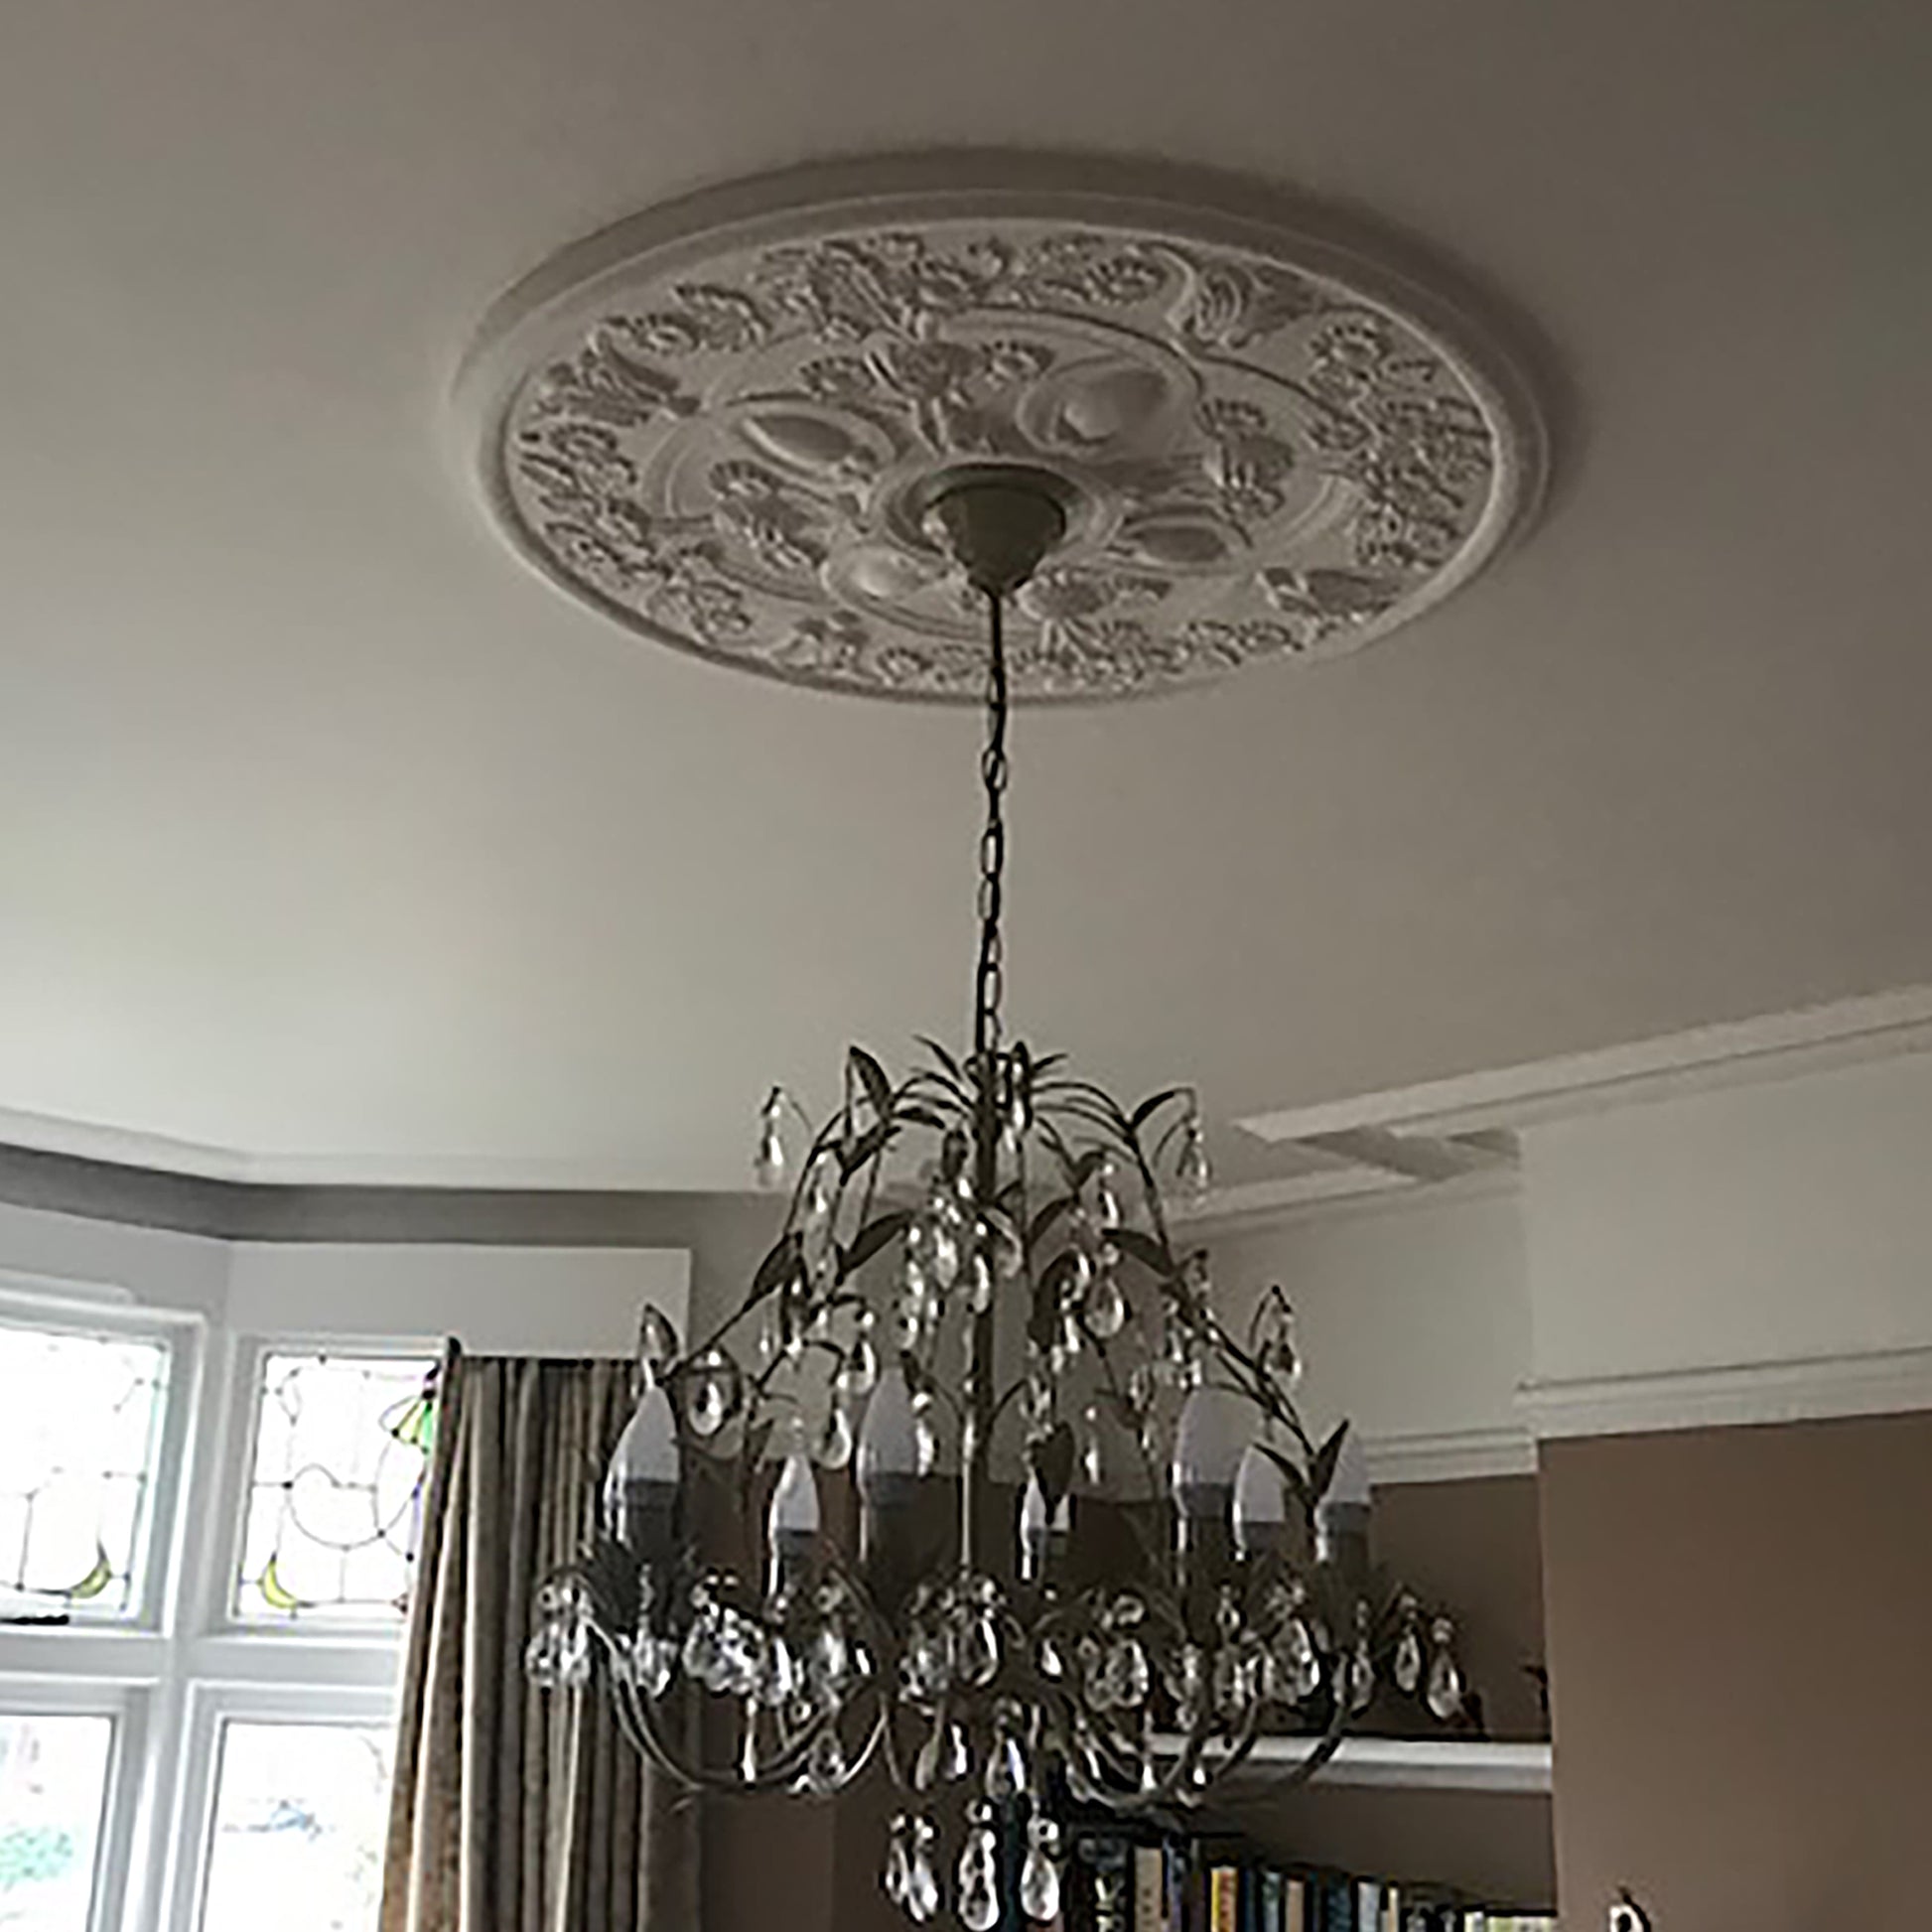 Victorian Gothic Plaster Ceiling Rose near large window